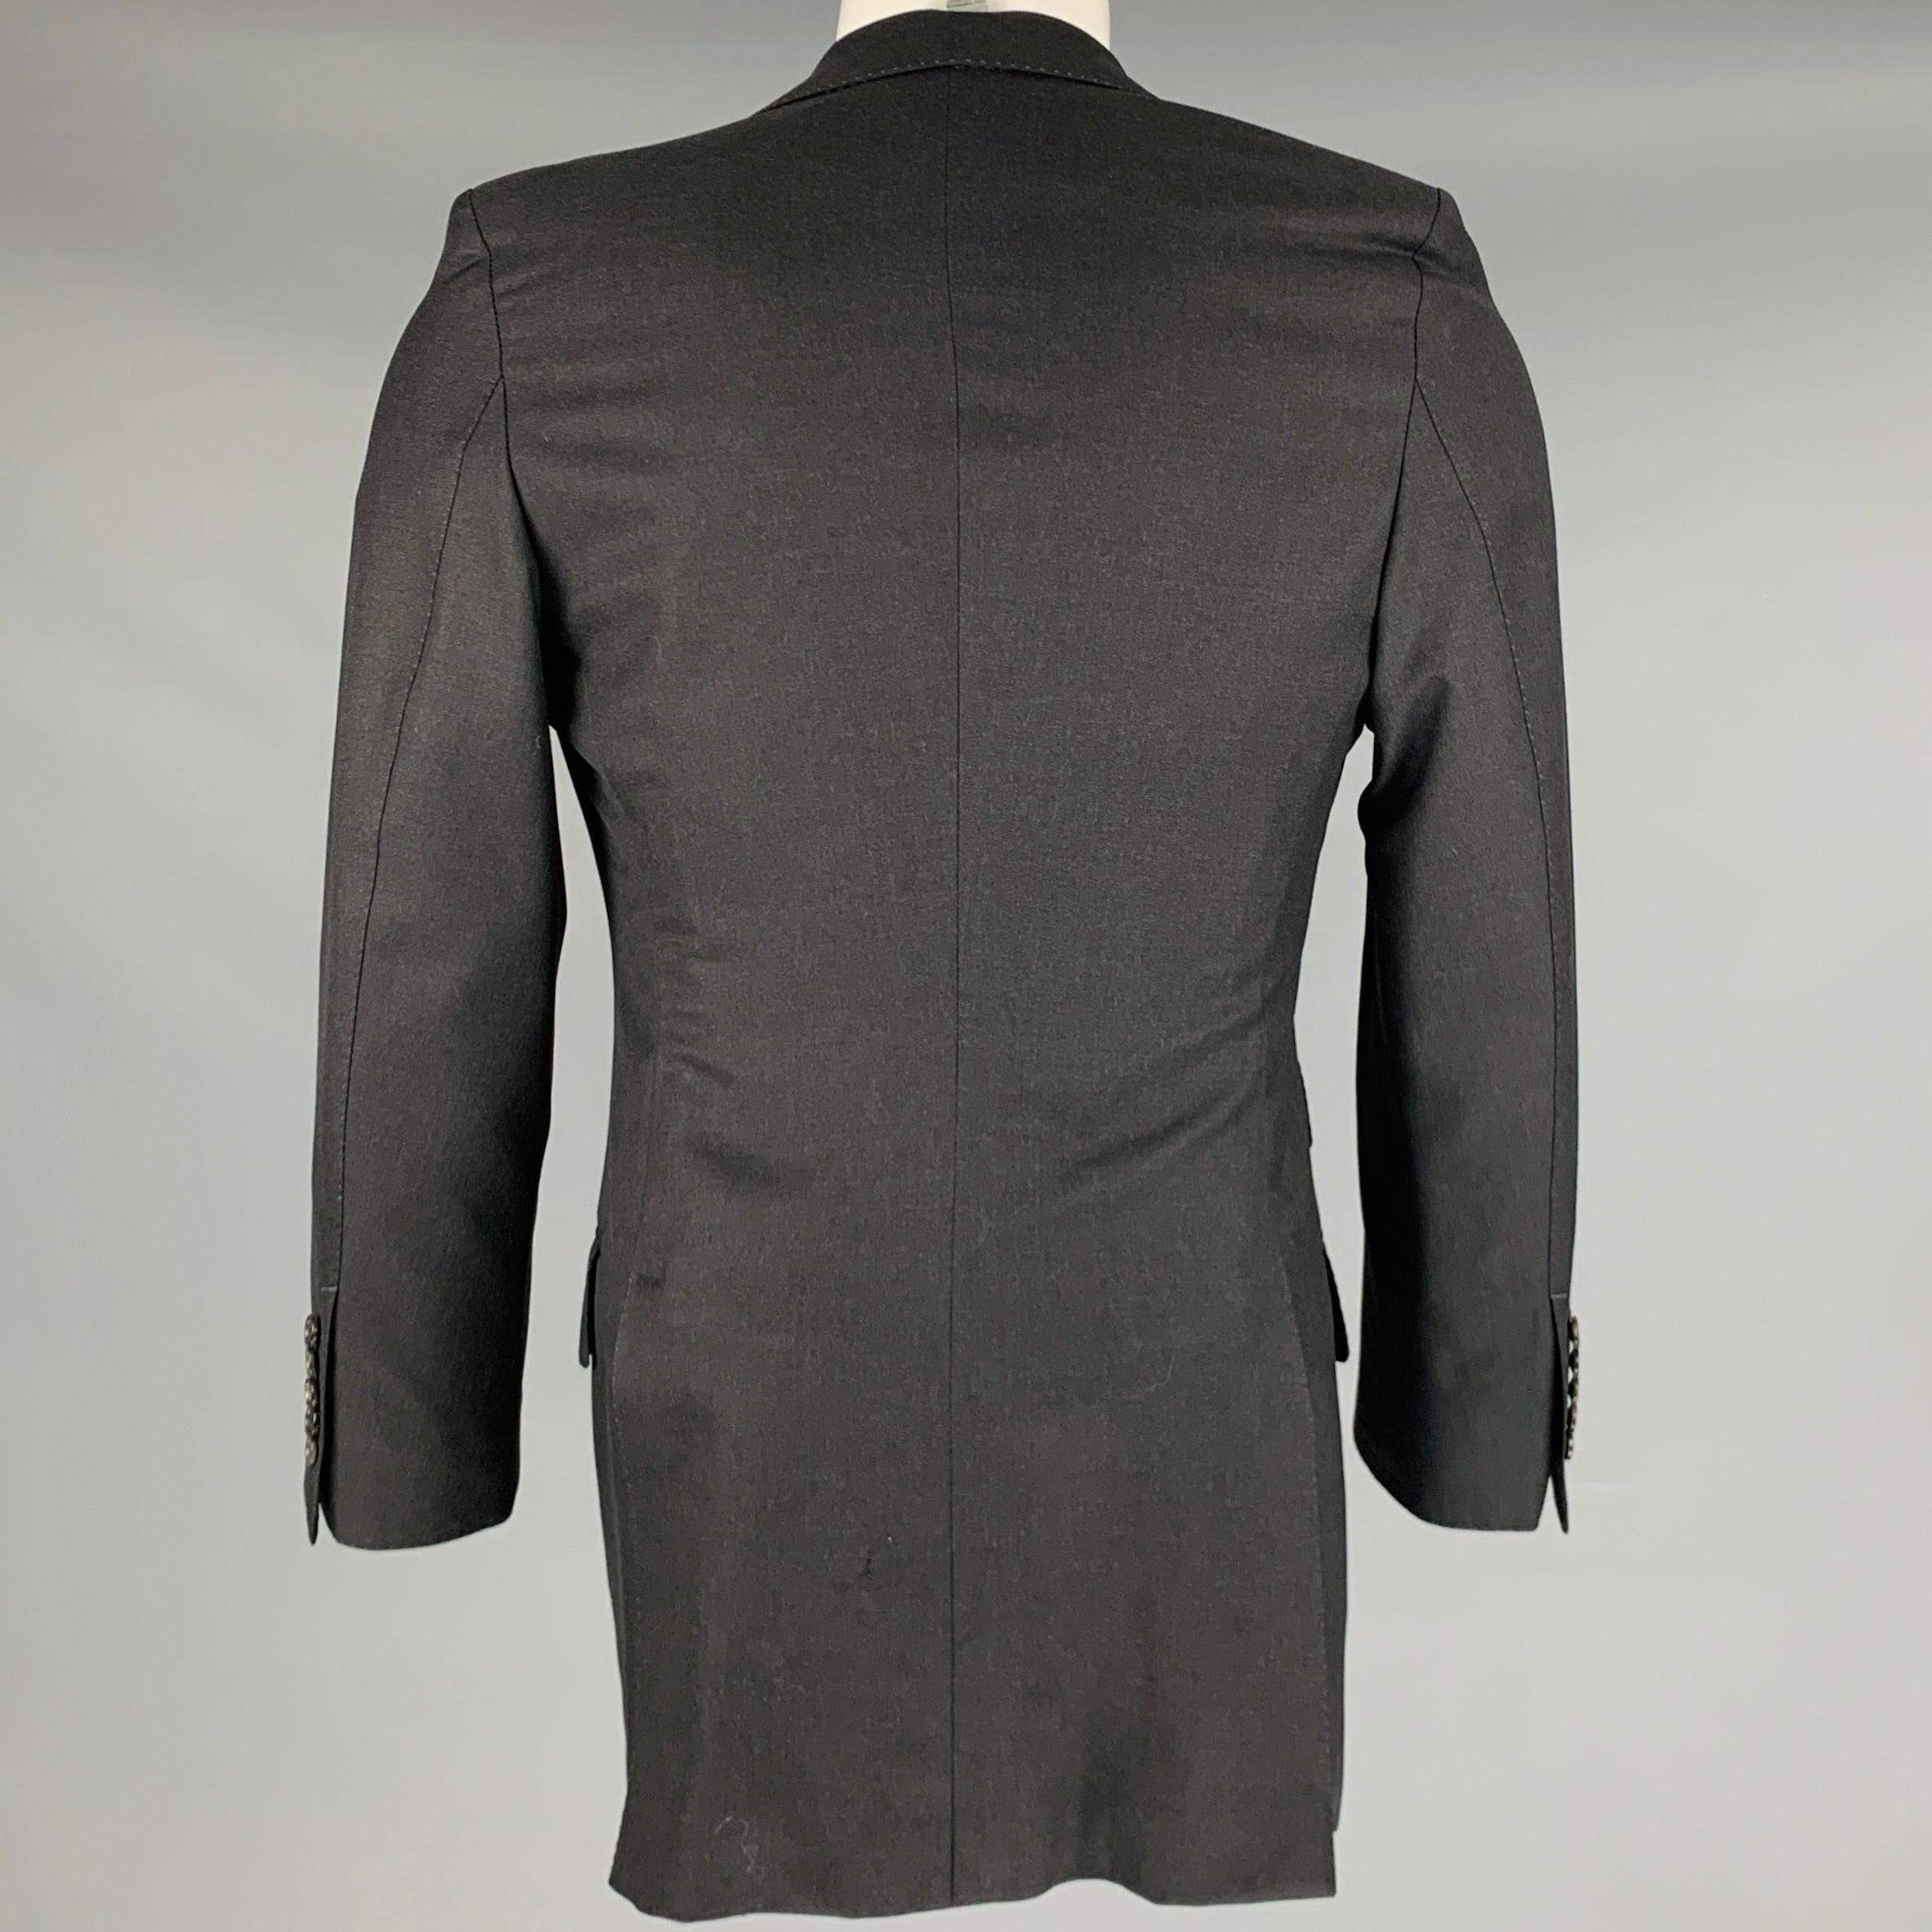 TOM FORD Size 38 Grey Wool Peak Lapel Sport Coat In Good Condition For Sale In San Francisco, CA